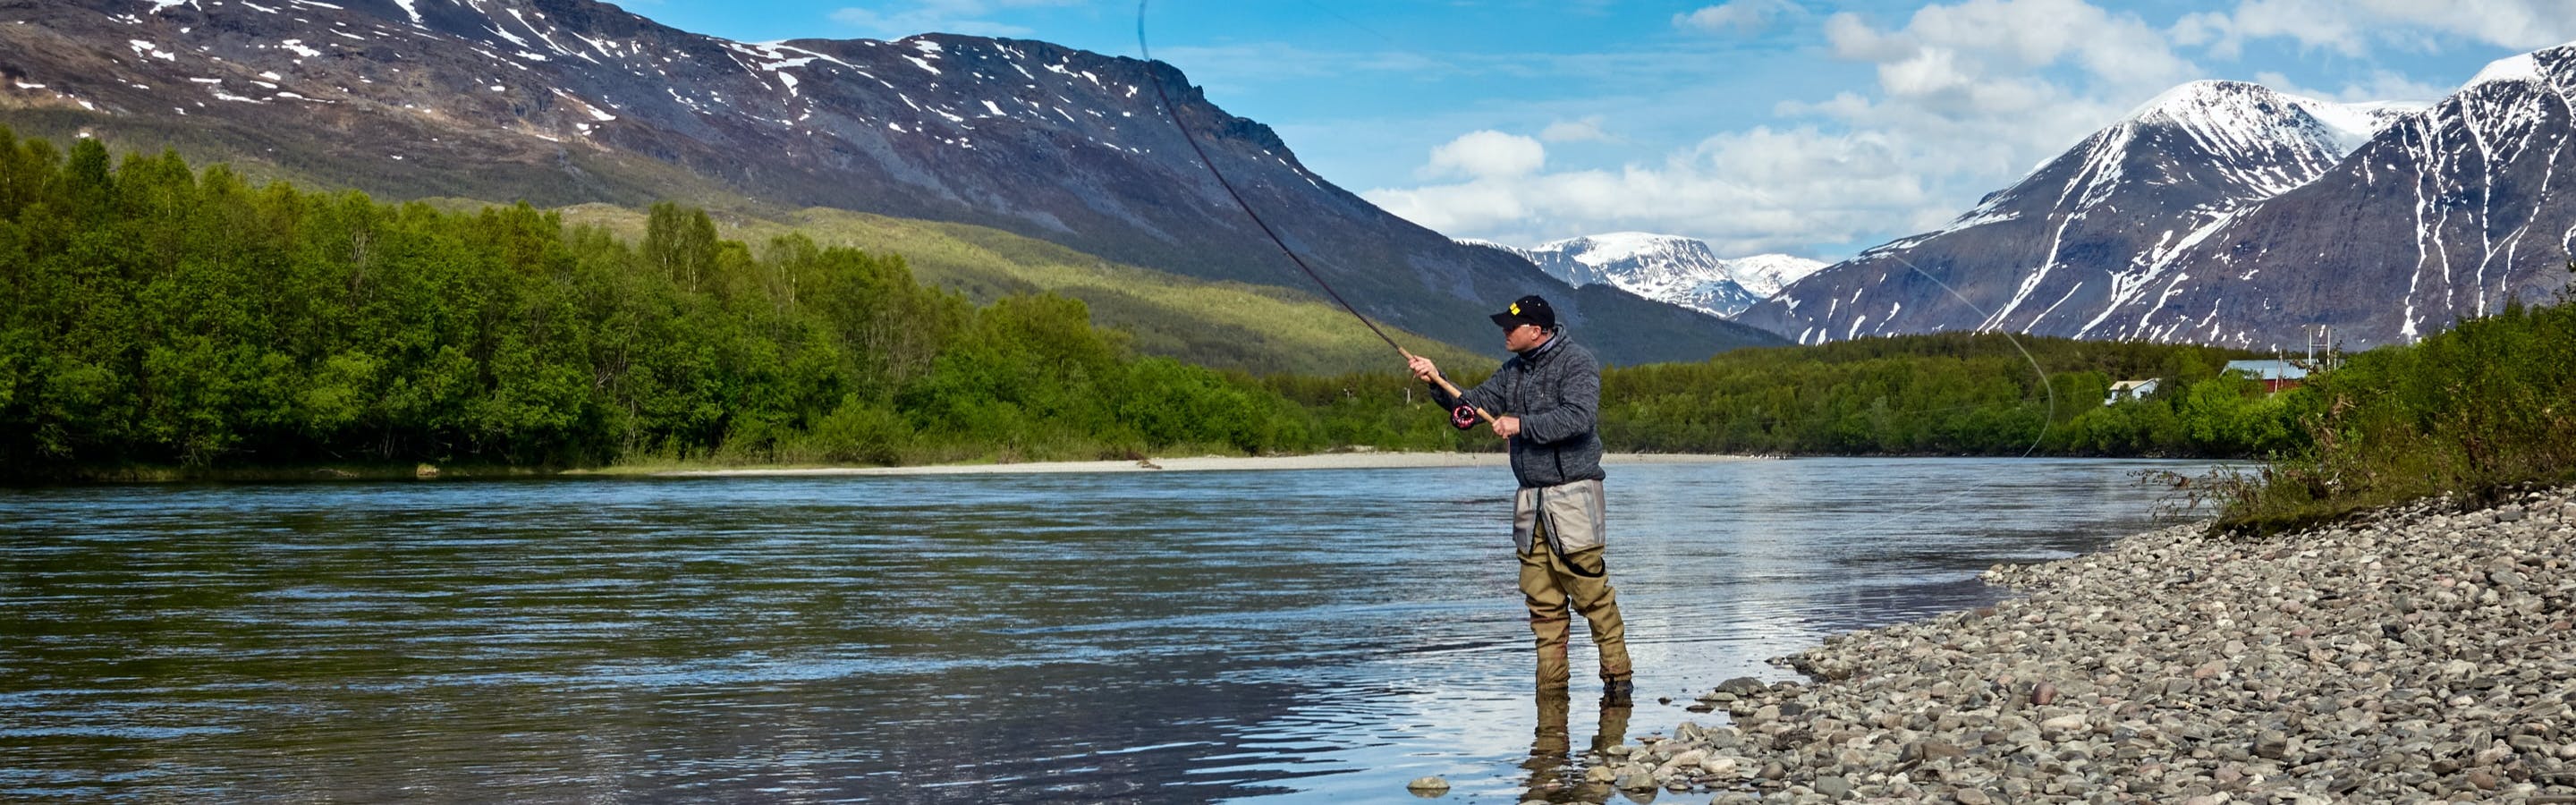 A man fly fishing in a river. There are mountains behind him and trees nearby. 